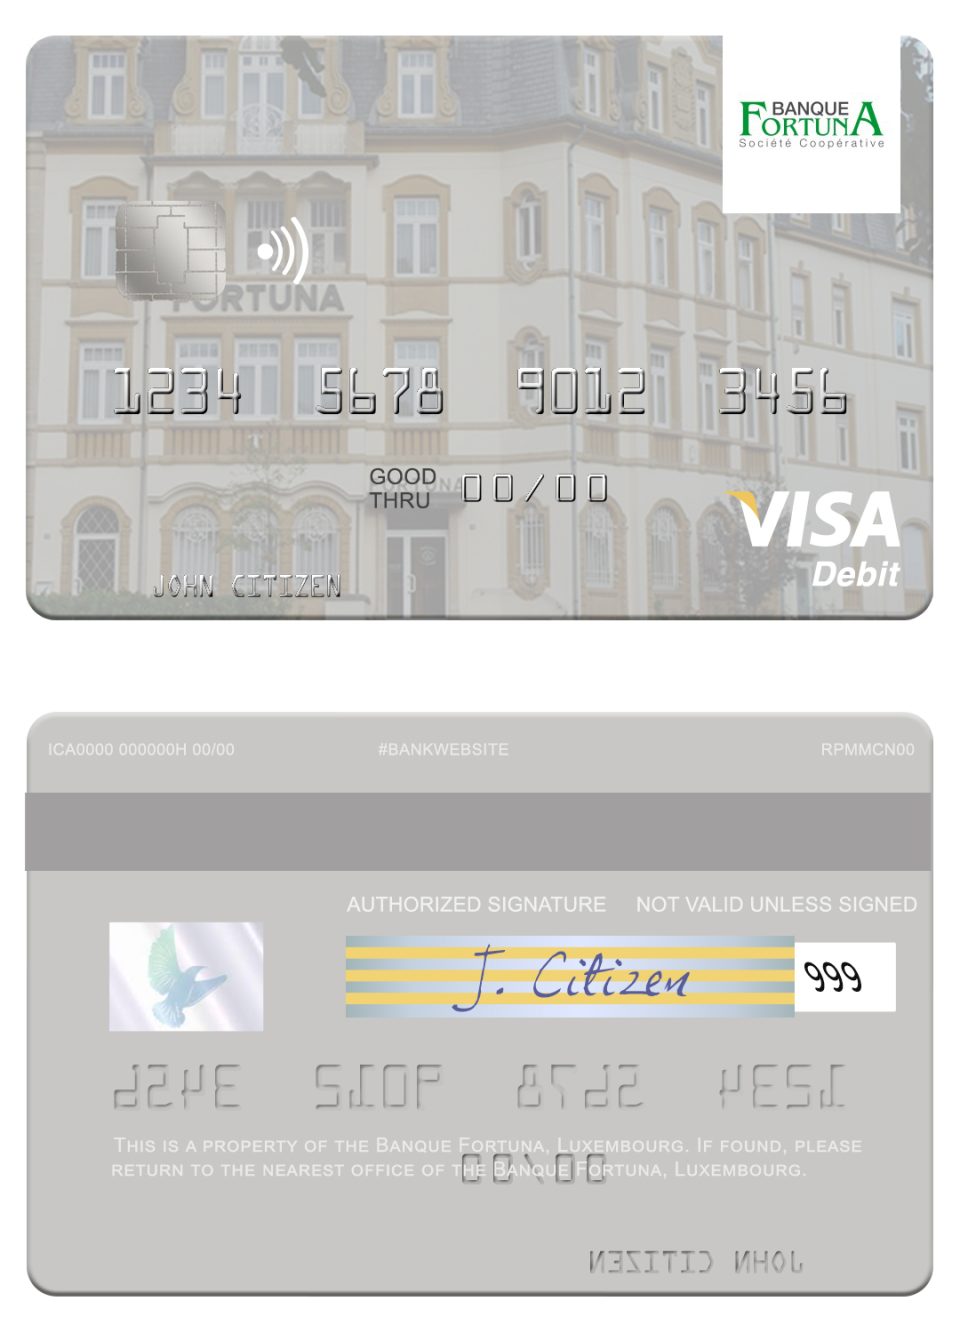 Fillable Luxembourg Banque Fortuna visa credit card Templates | Layer-Based PSD